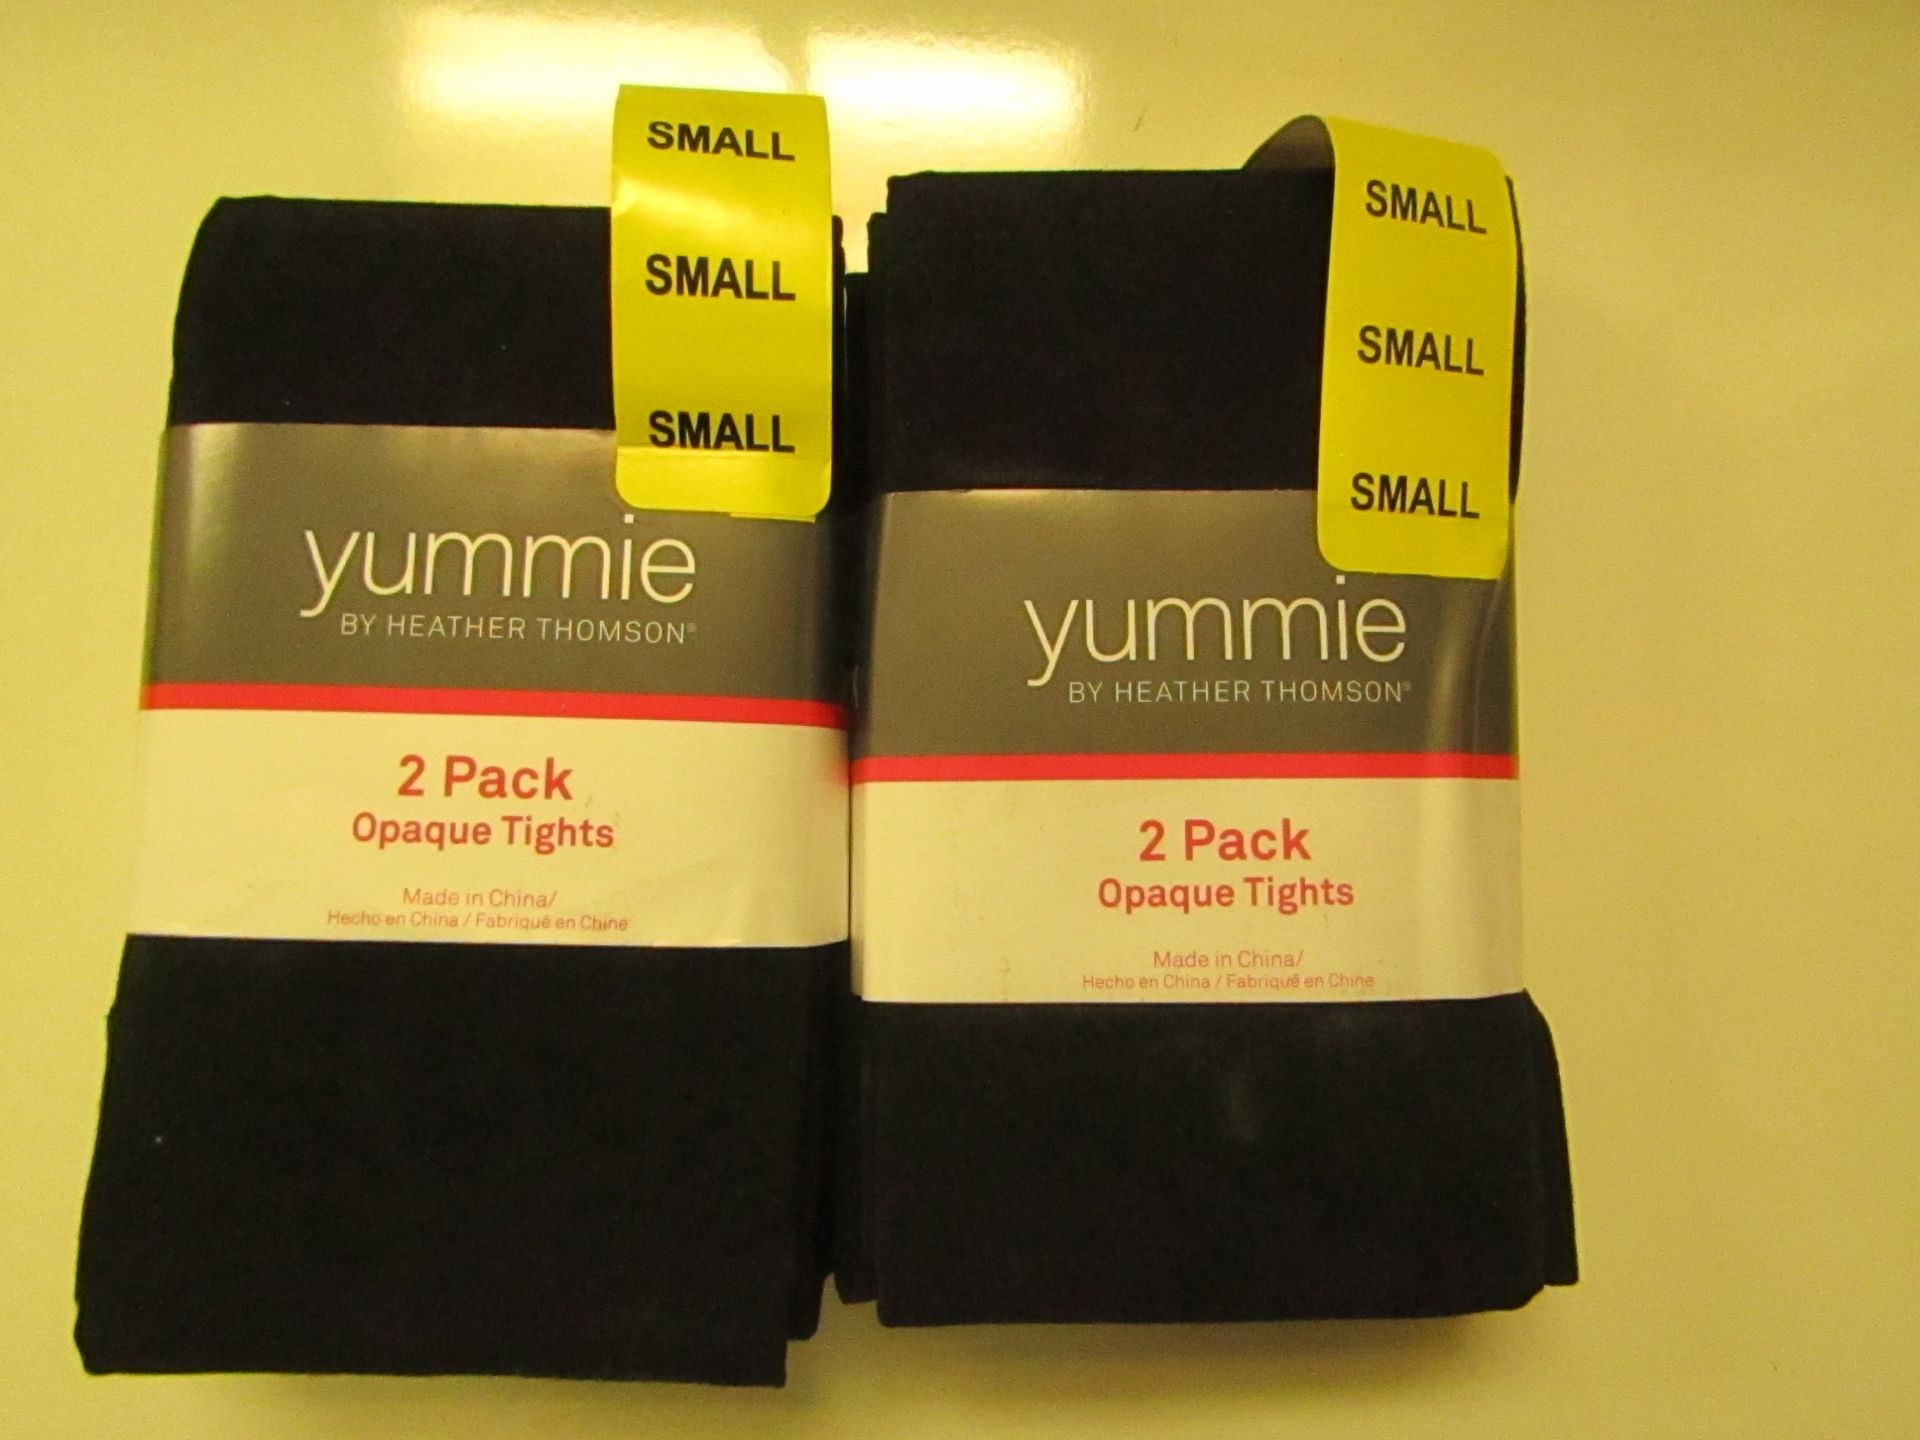 2x Packs of 2 Yummie opaque tights,Black size S, new & packaged